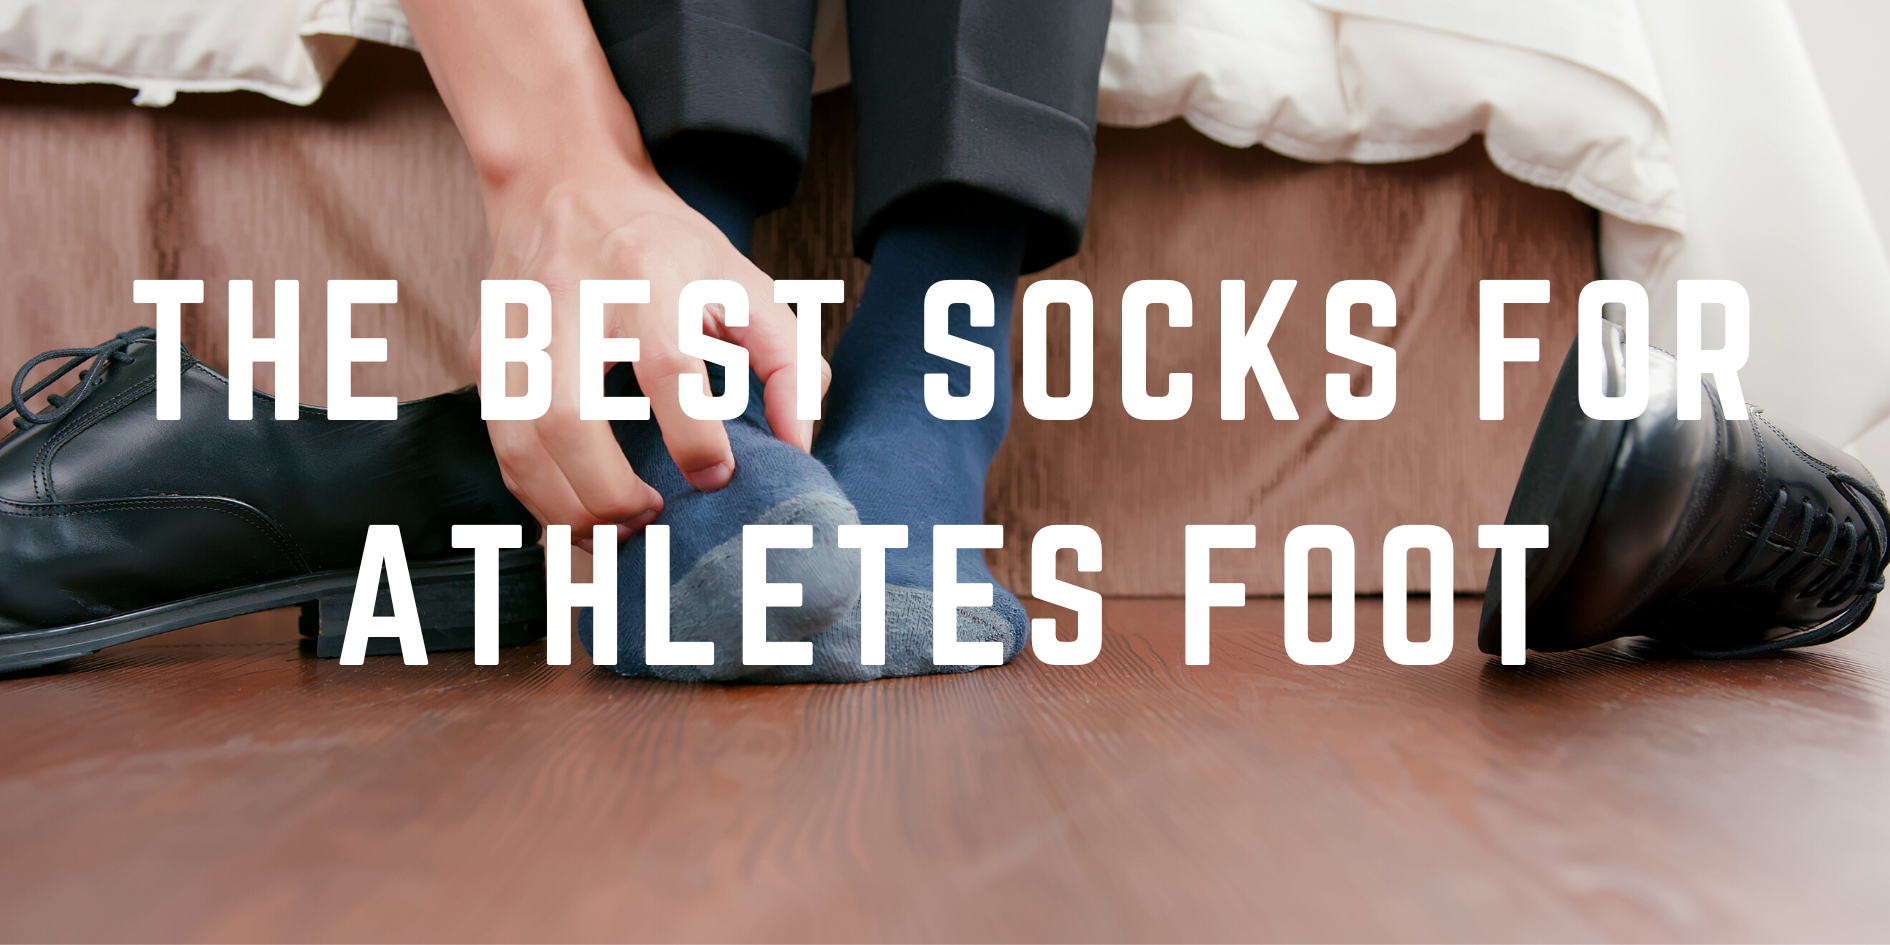 The Best Socks for Athletes Foot